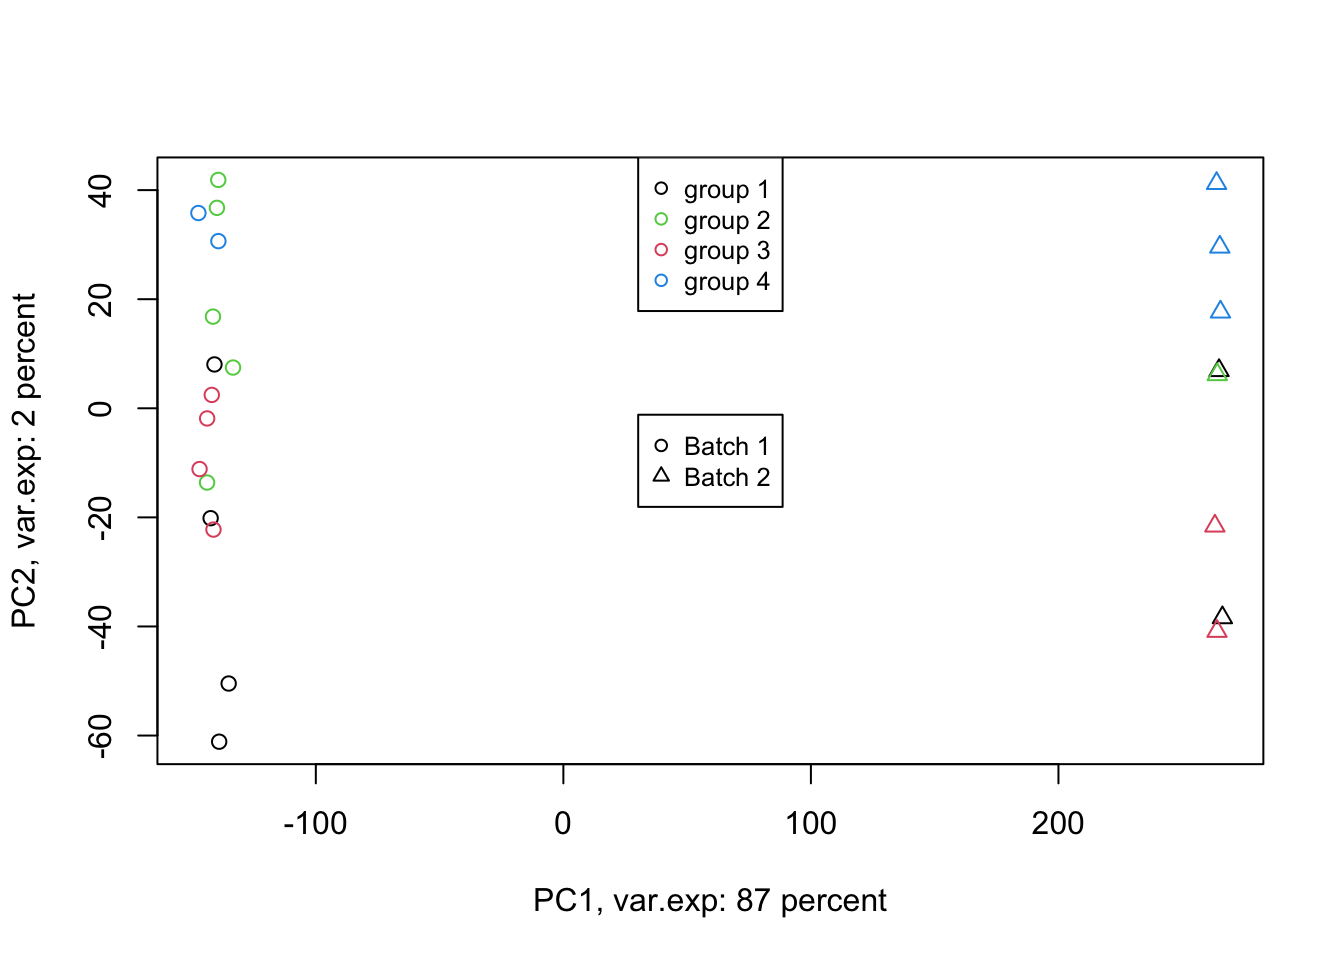 PCA of the data using first two components (v2)